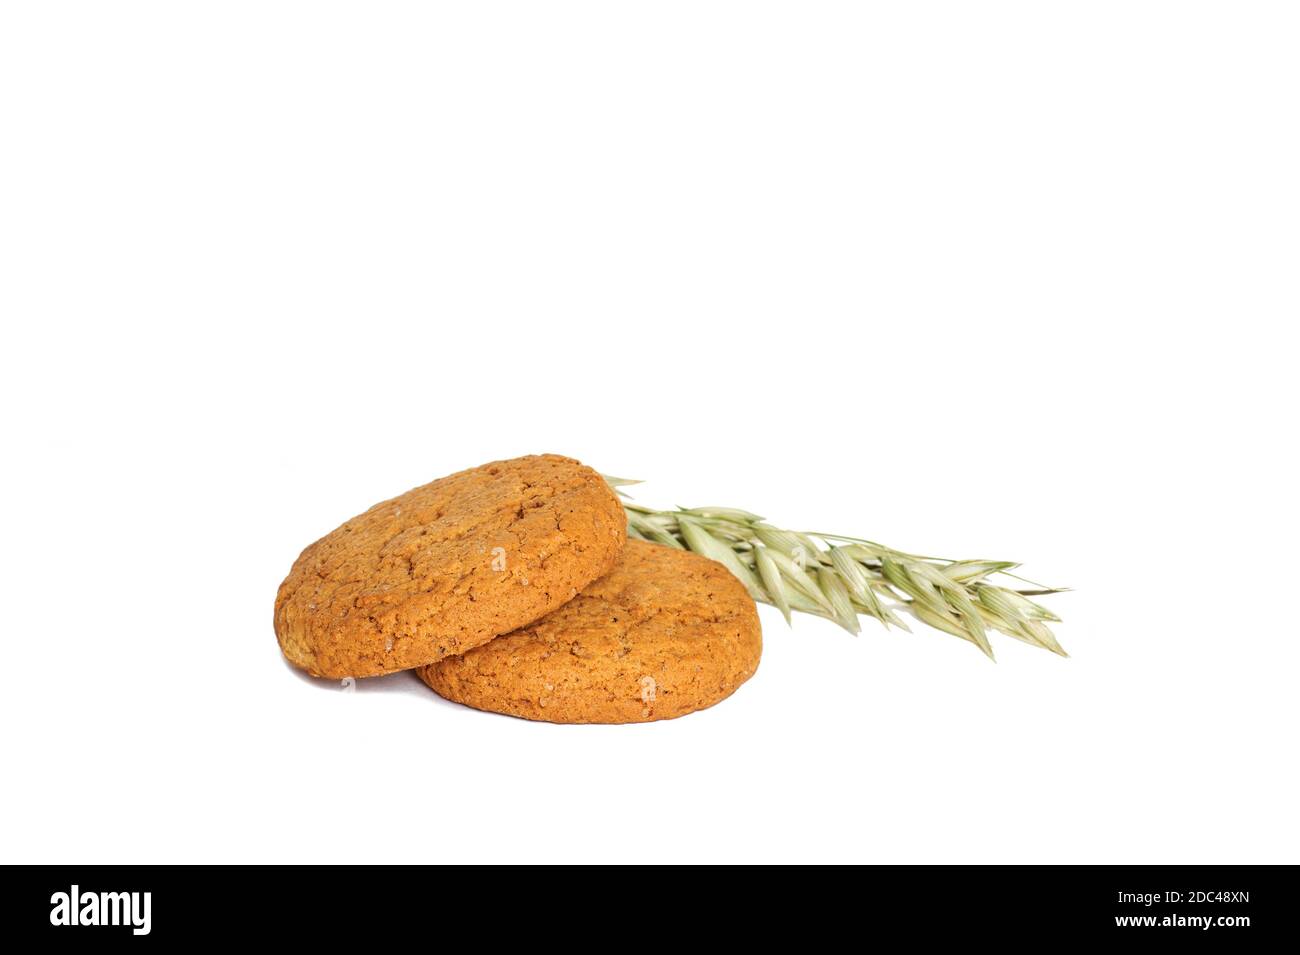 Oatmeal cookies with green ears of oats cut out on a white background. Stock Photo